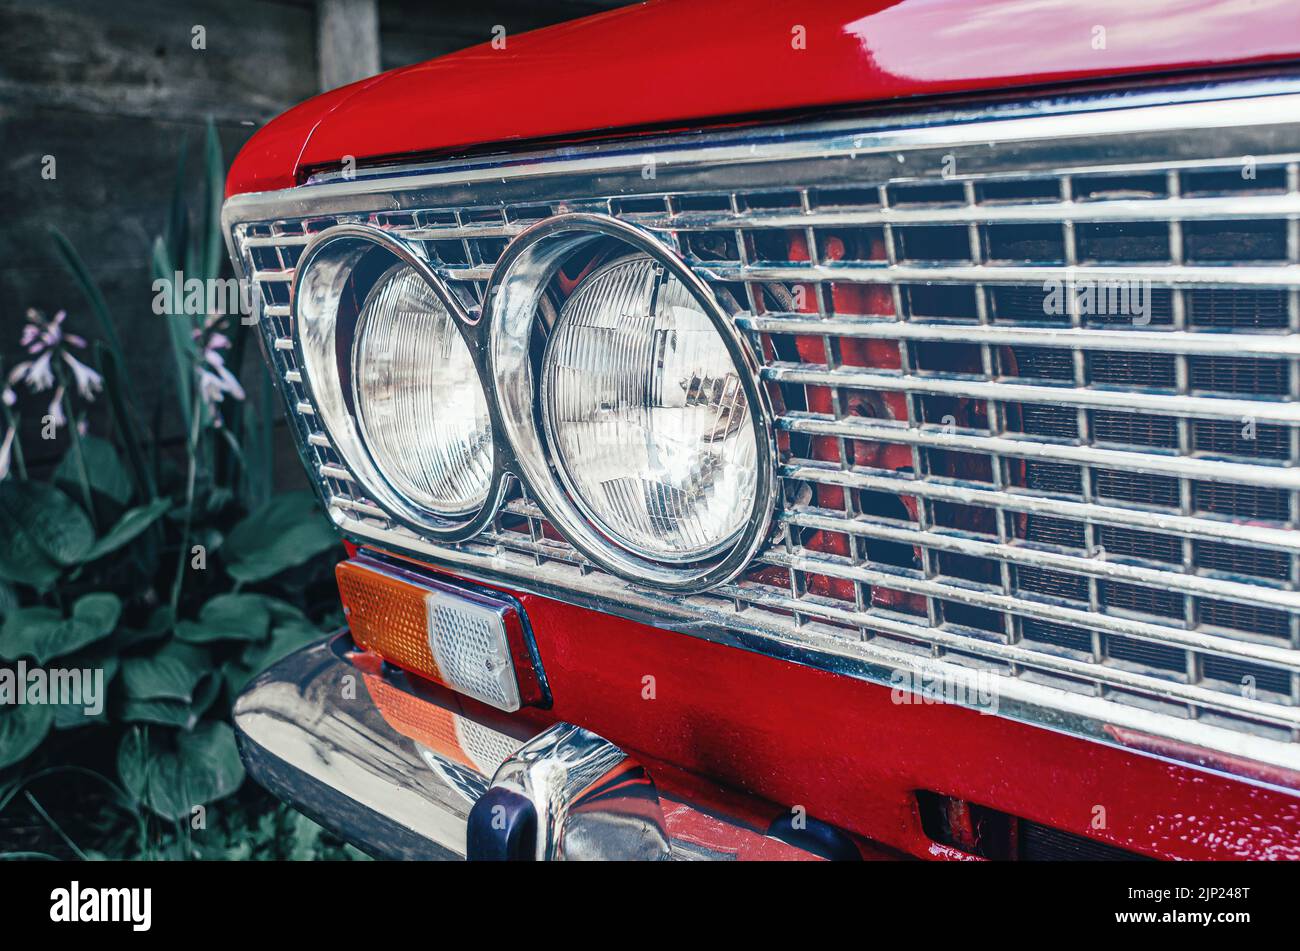 Headlights of red car close-up. Front of old red Lada car. Blurred background Stock Photo